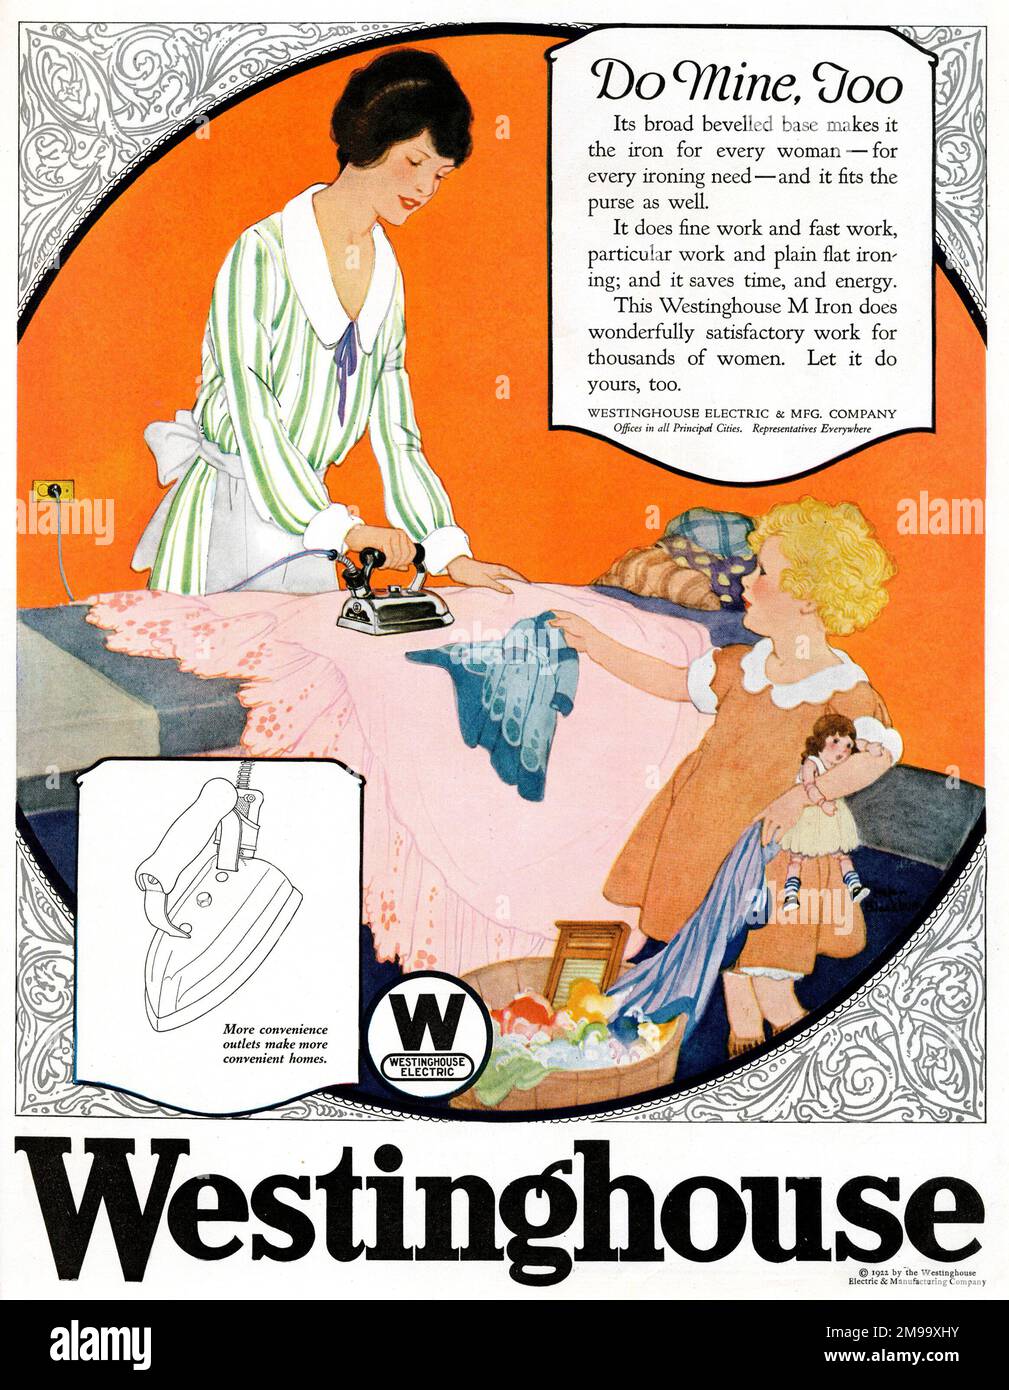 Advert, Westinghouse electric iron -- mother and daughter ironing. Stock Photo